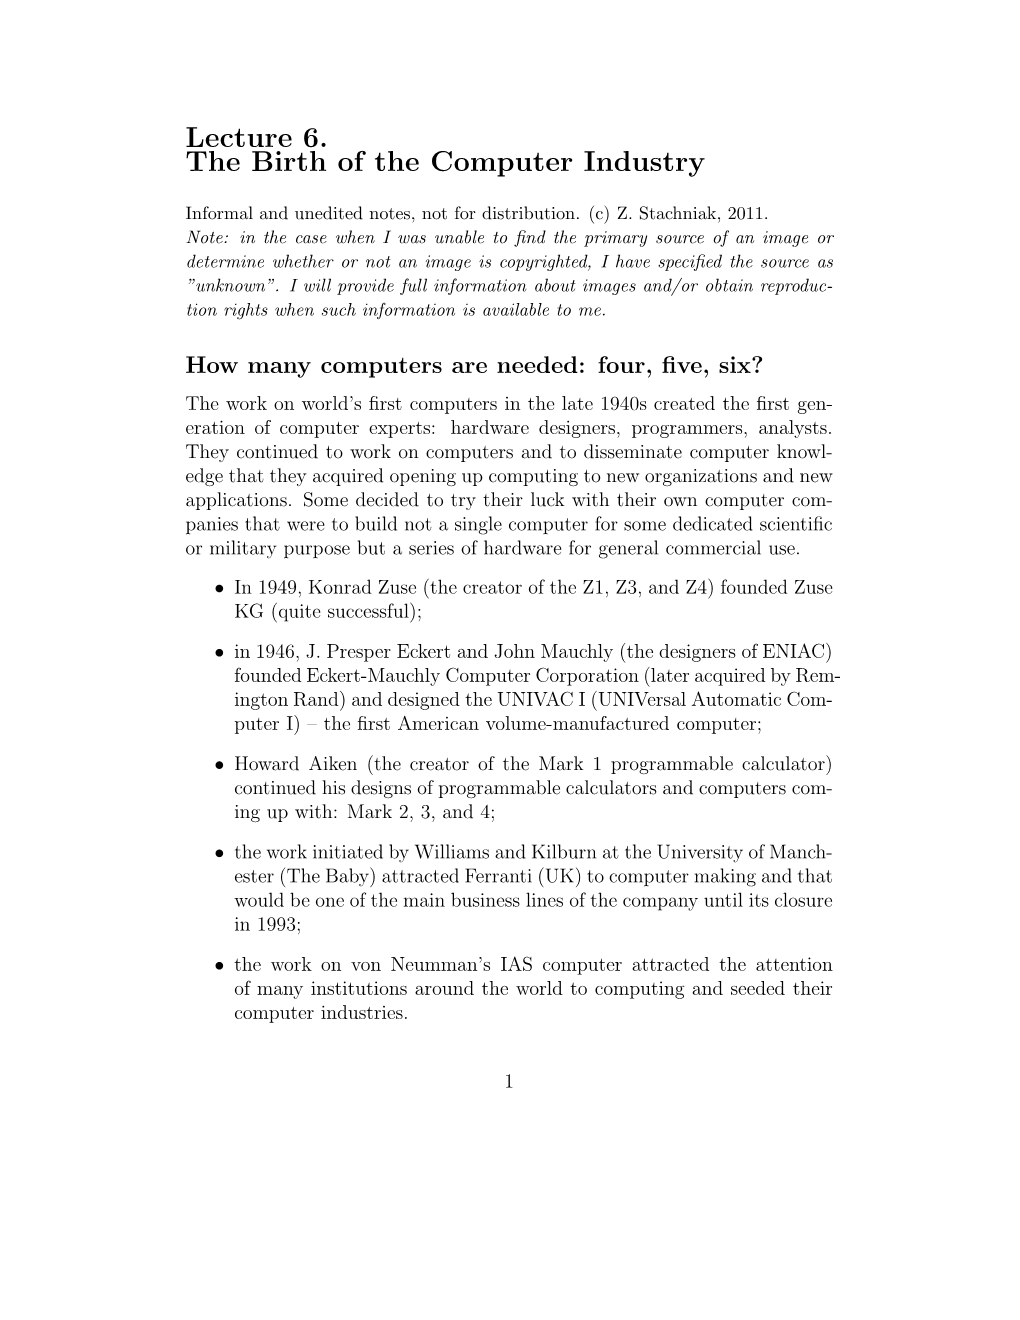 Lecture 6. the Birth of the Computer Industry